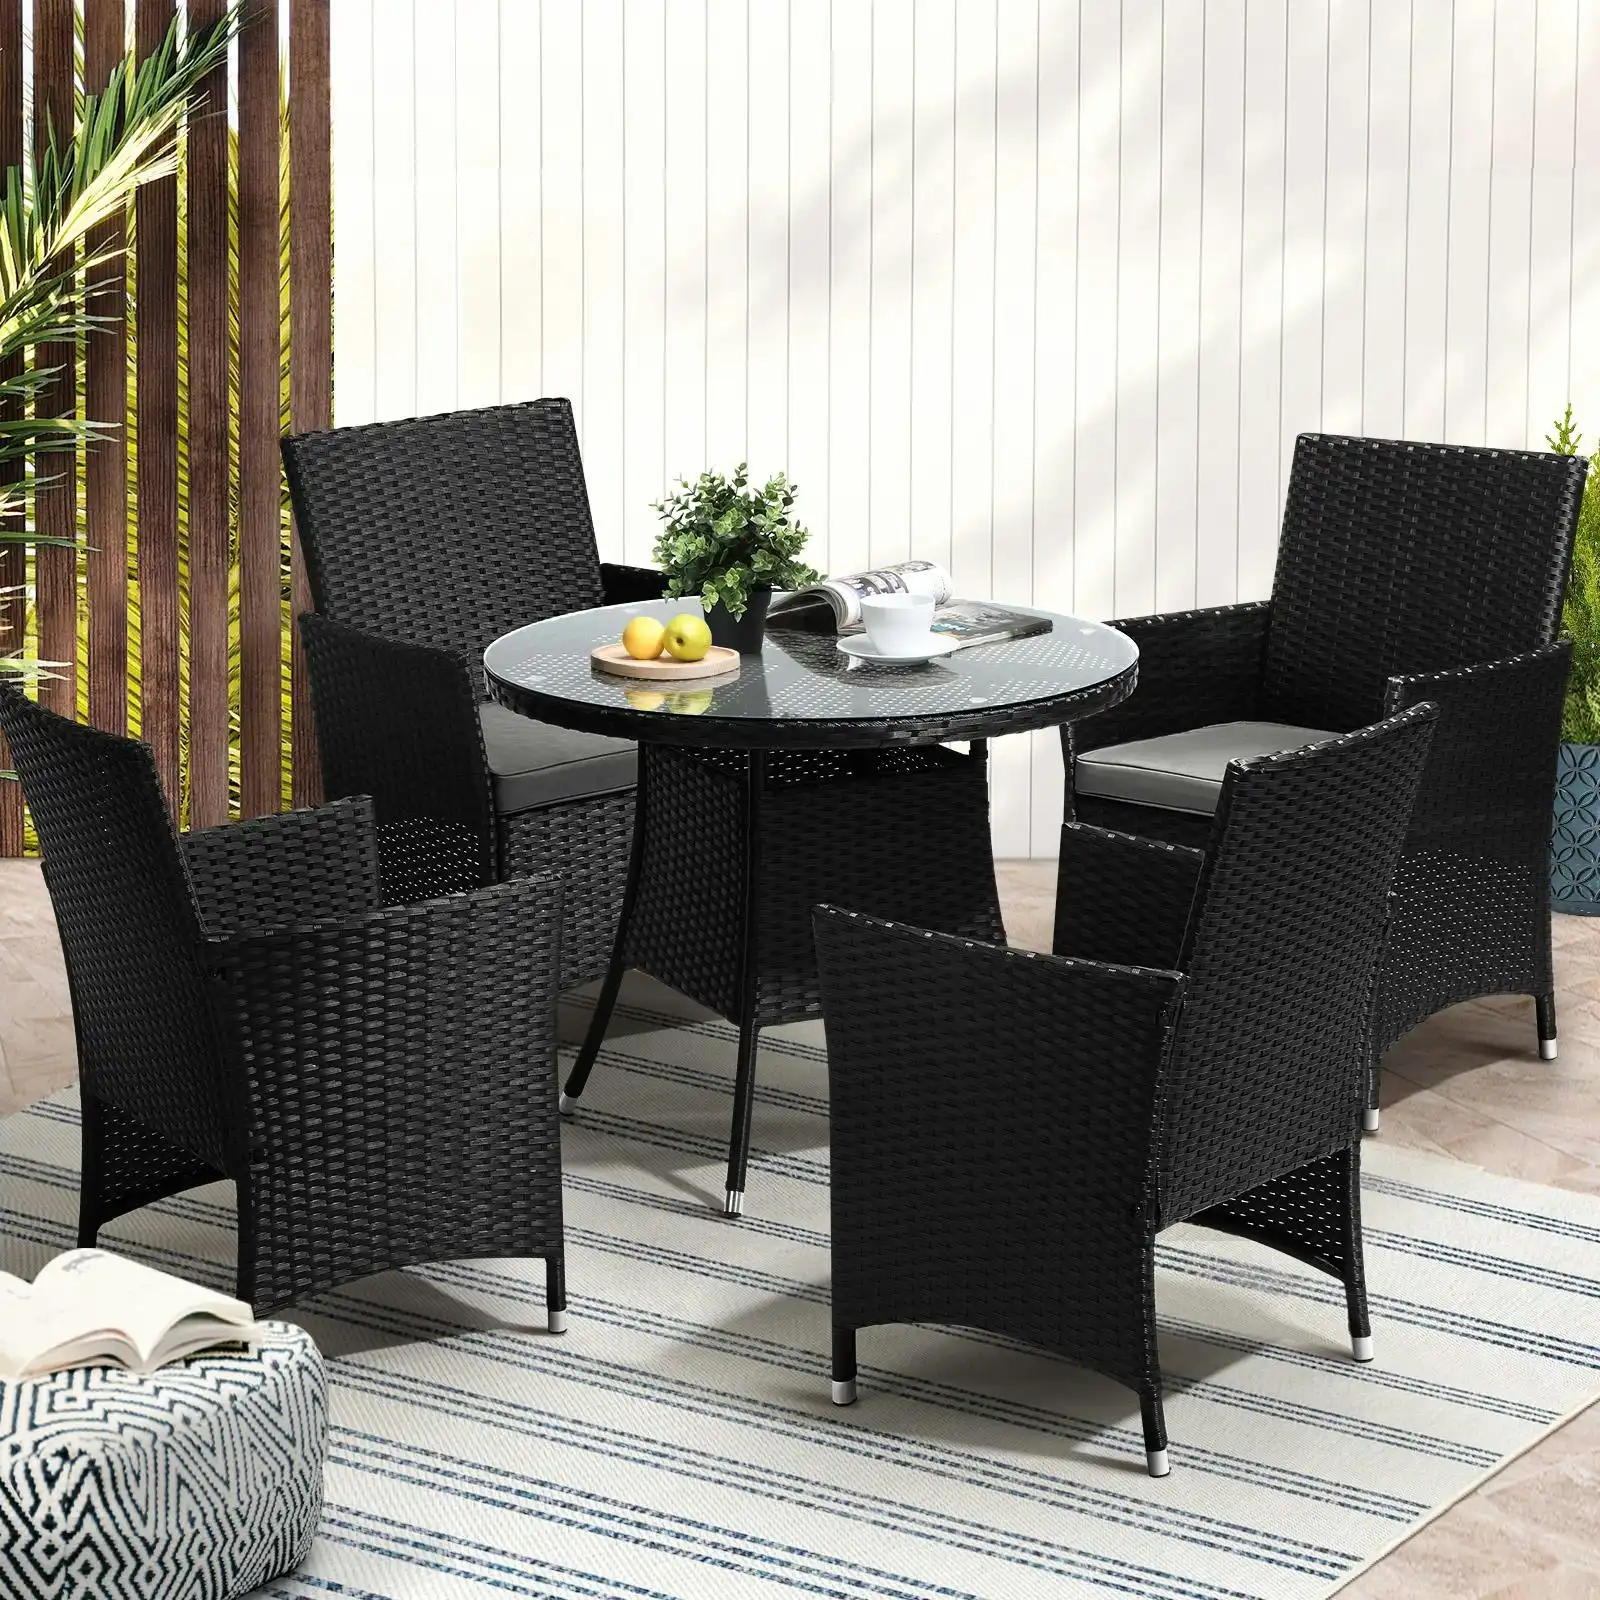 Livsip 5 PCS Outdoor Dining Set Table & Chairs Patio Furniture Lounge Setting